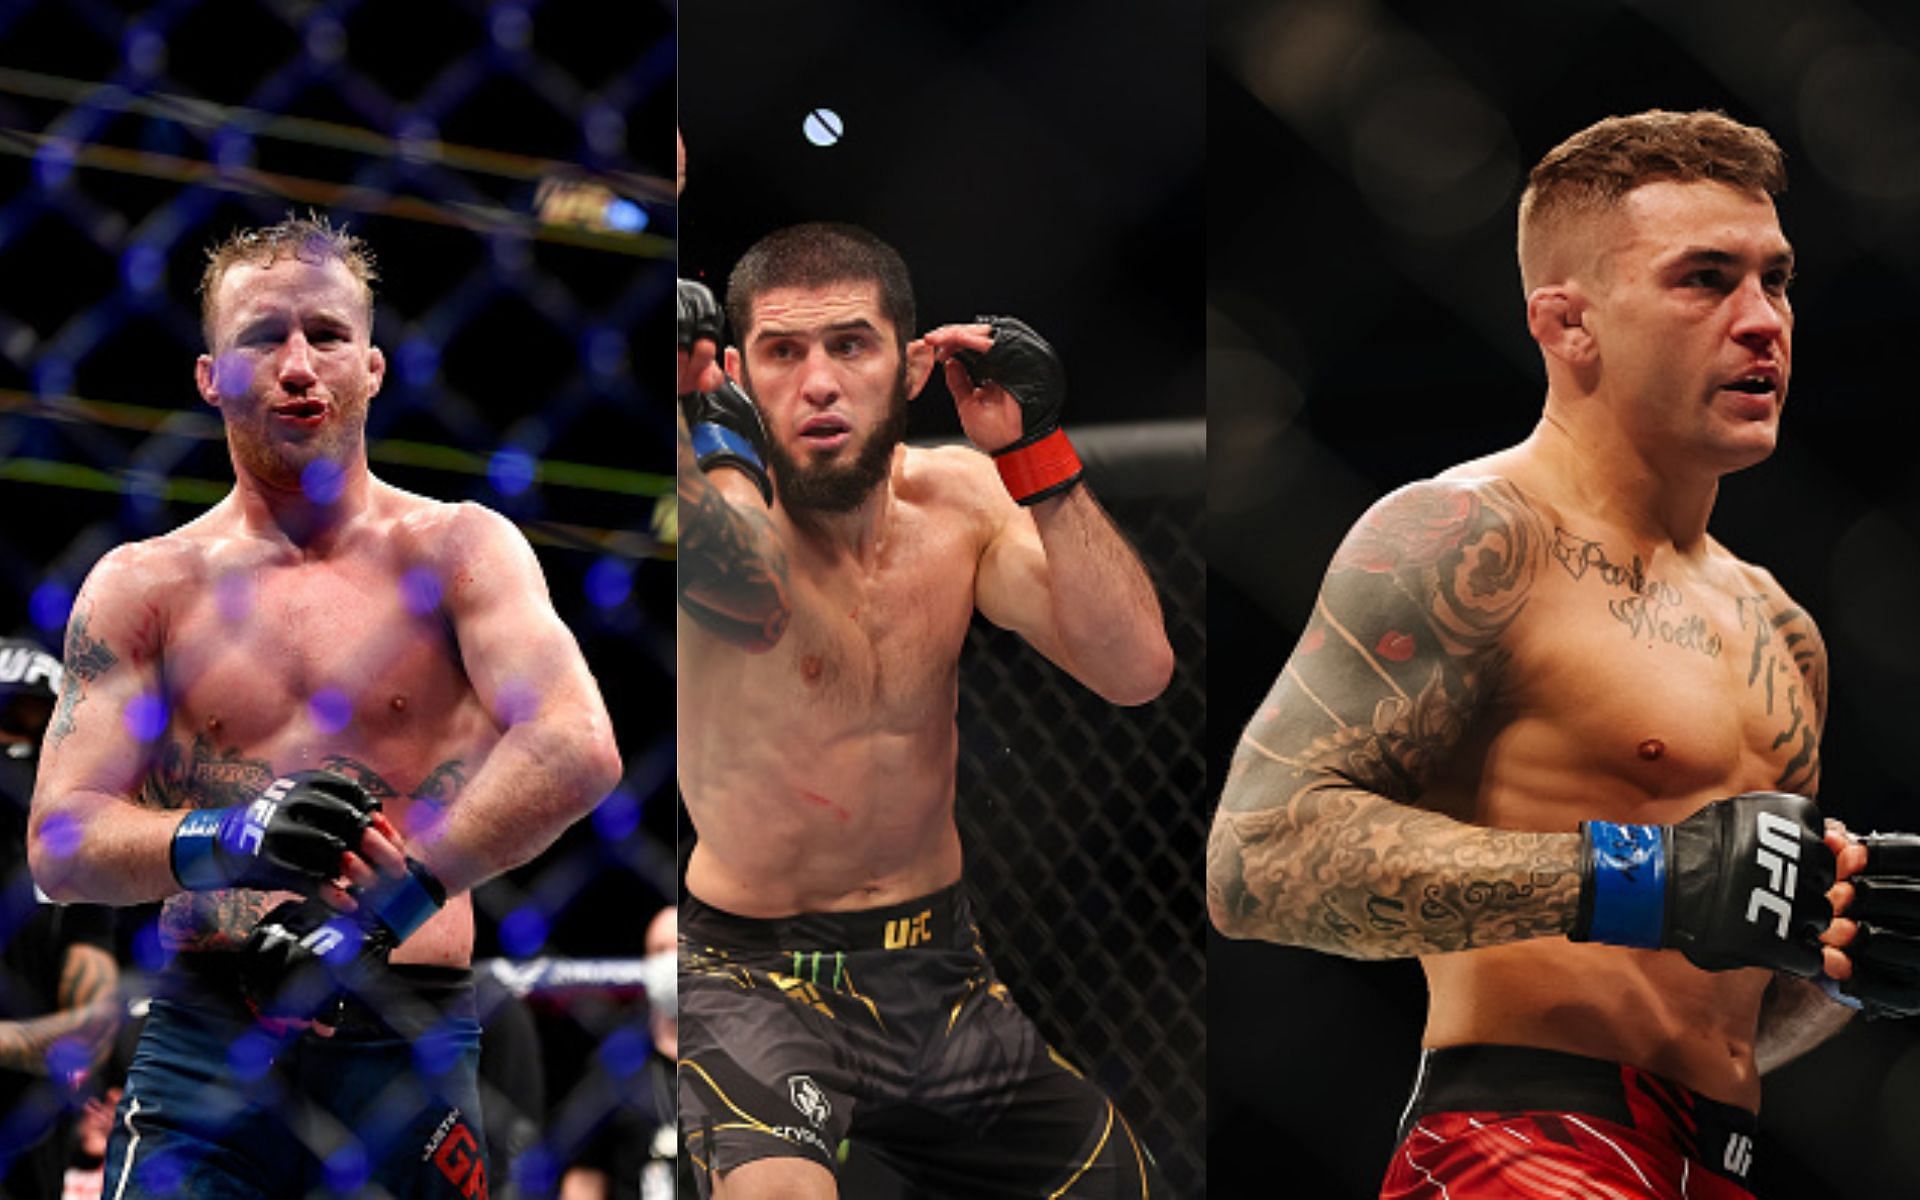 Justin Gaethje weighs in on Islam Makhachev vs. Dustin Poirier [Image credits: Getty Images]